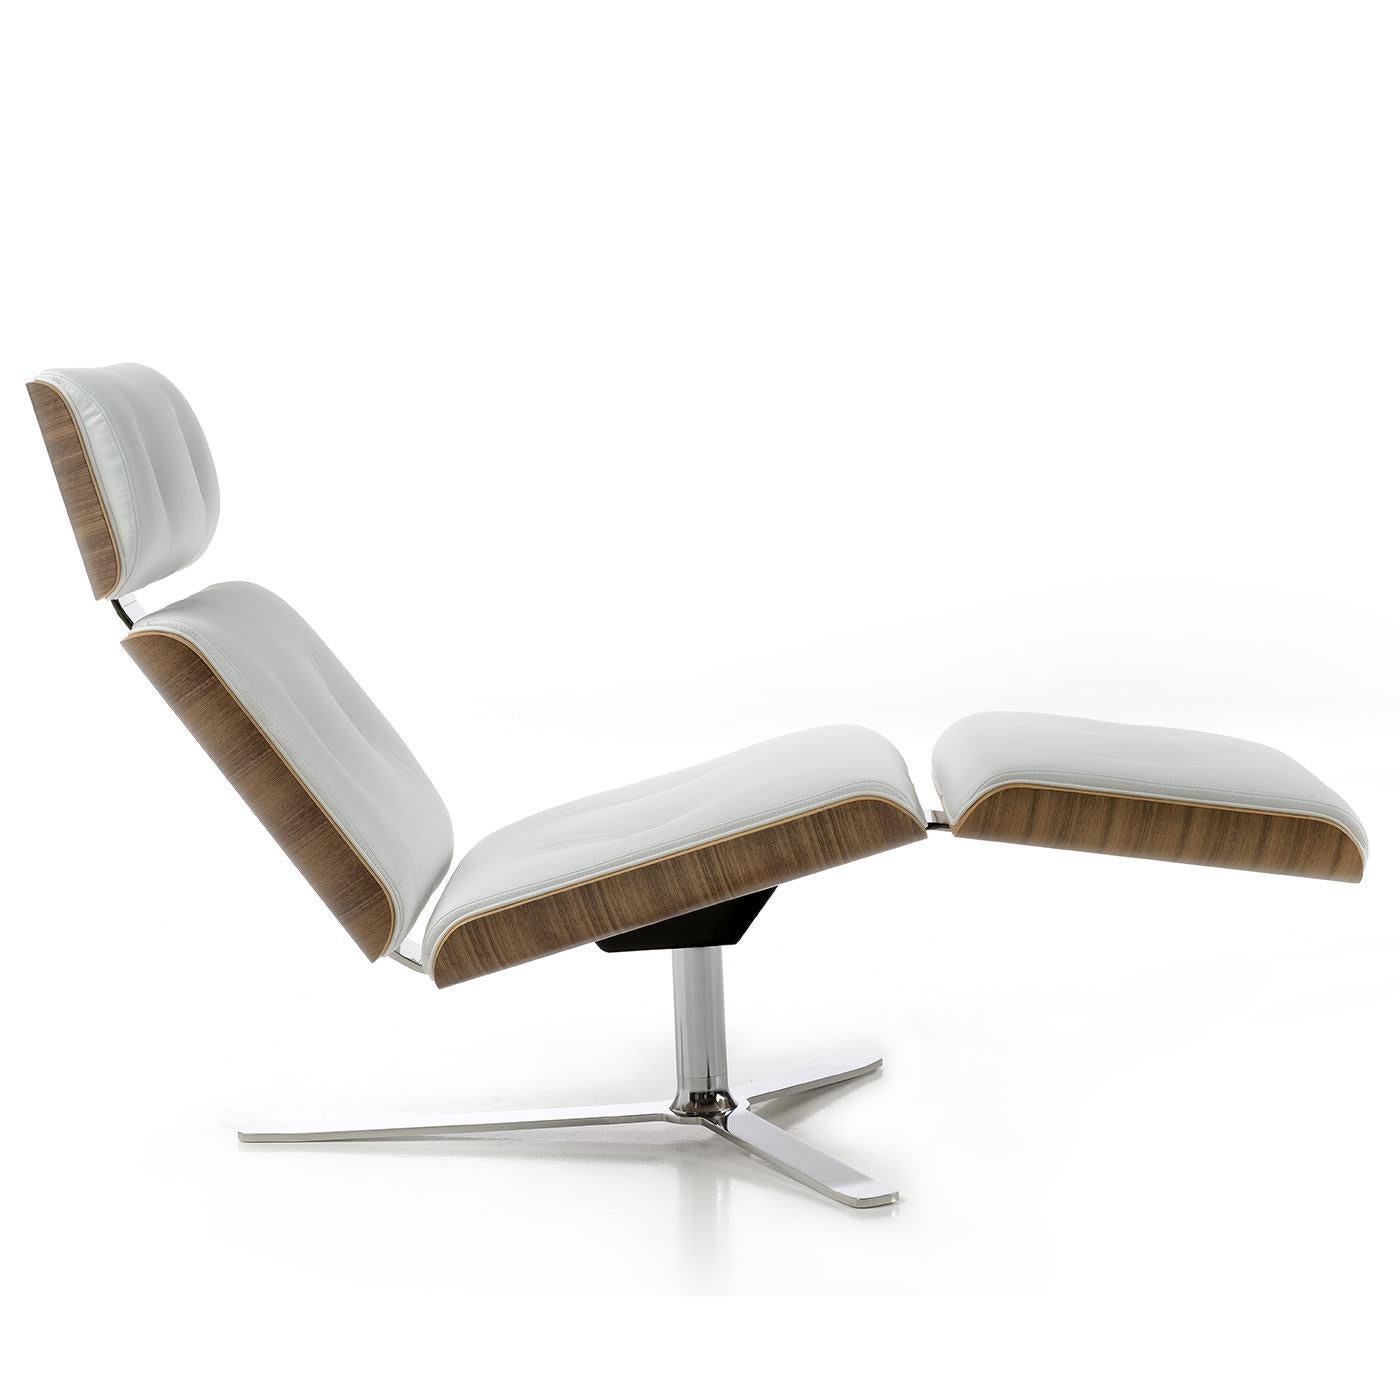 The Armadillo/7 is a luxury chaise longue by Rainer Bachschmid that combines design and high-quality materials without sacrificing comfort. Distinguished by an inviting ergonomic position, the padded seat cushions are upholstered in white genuine